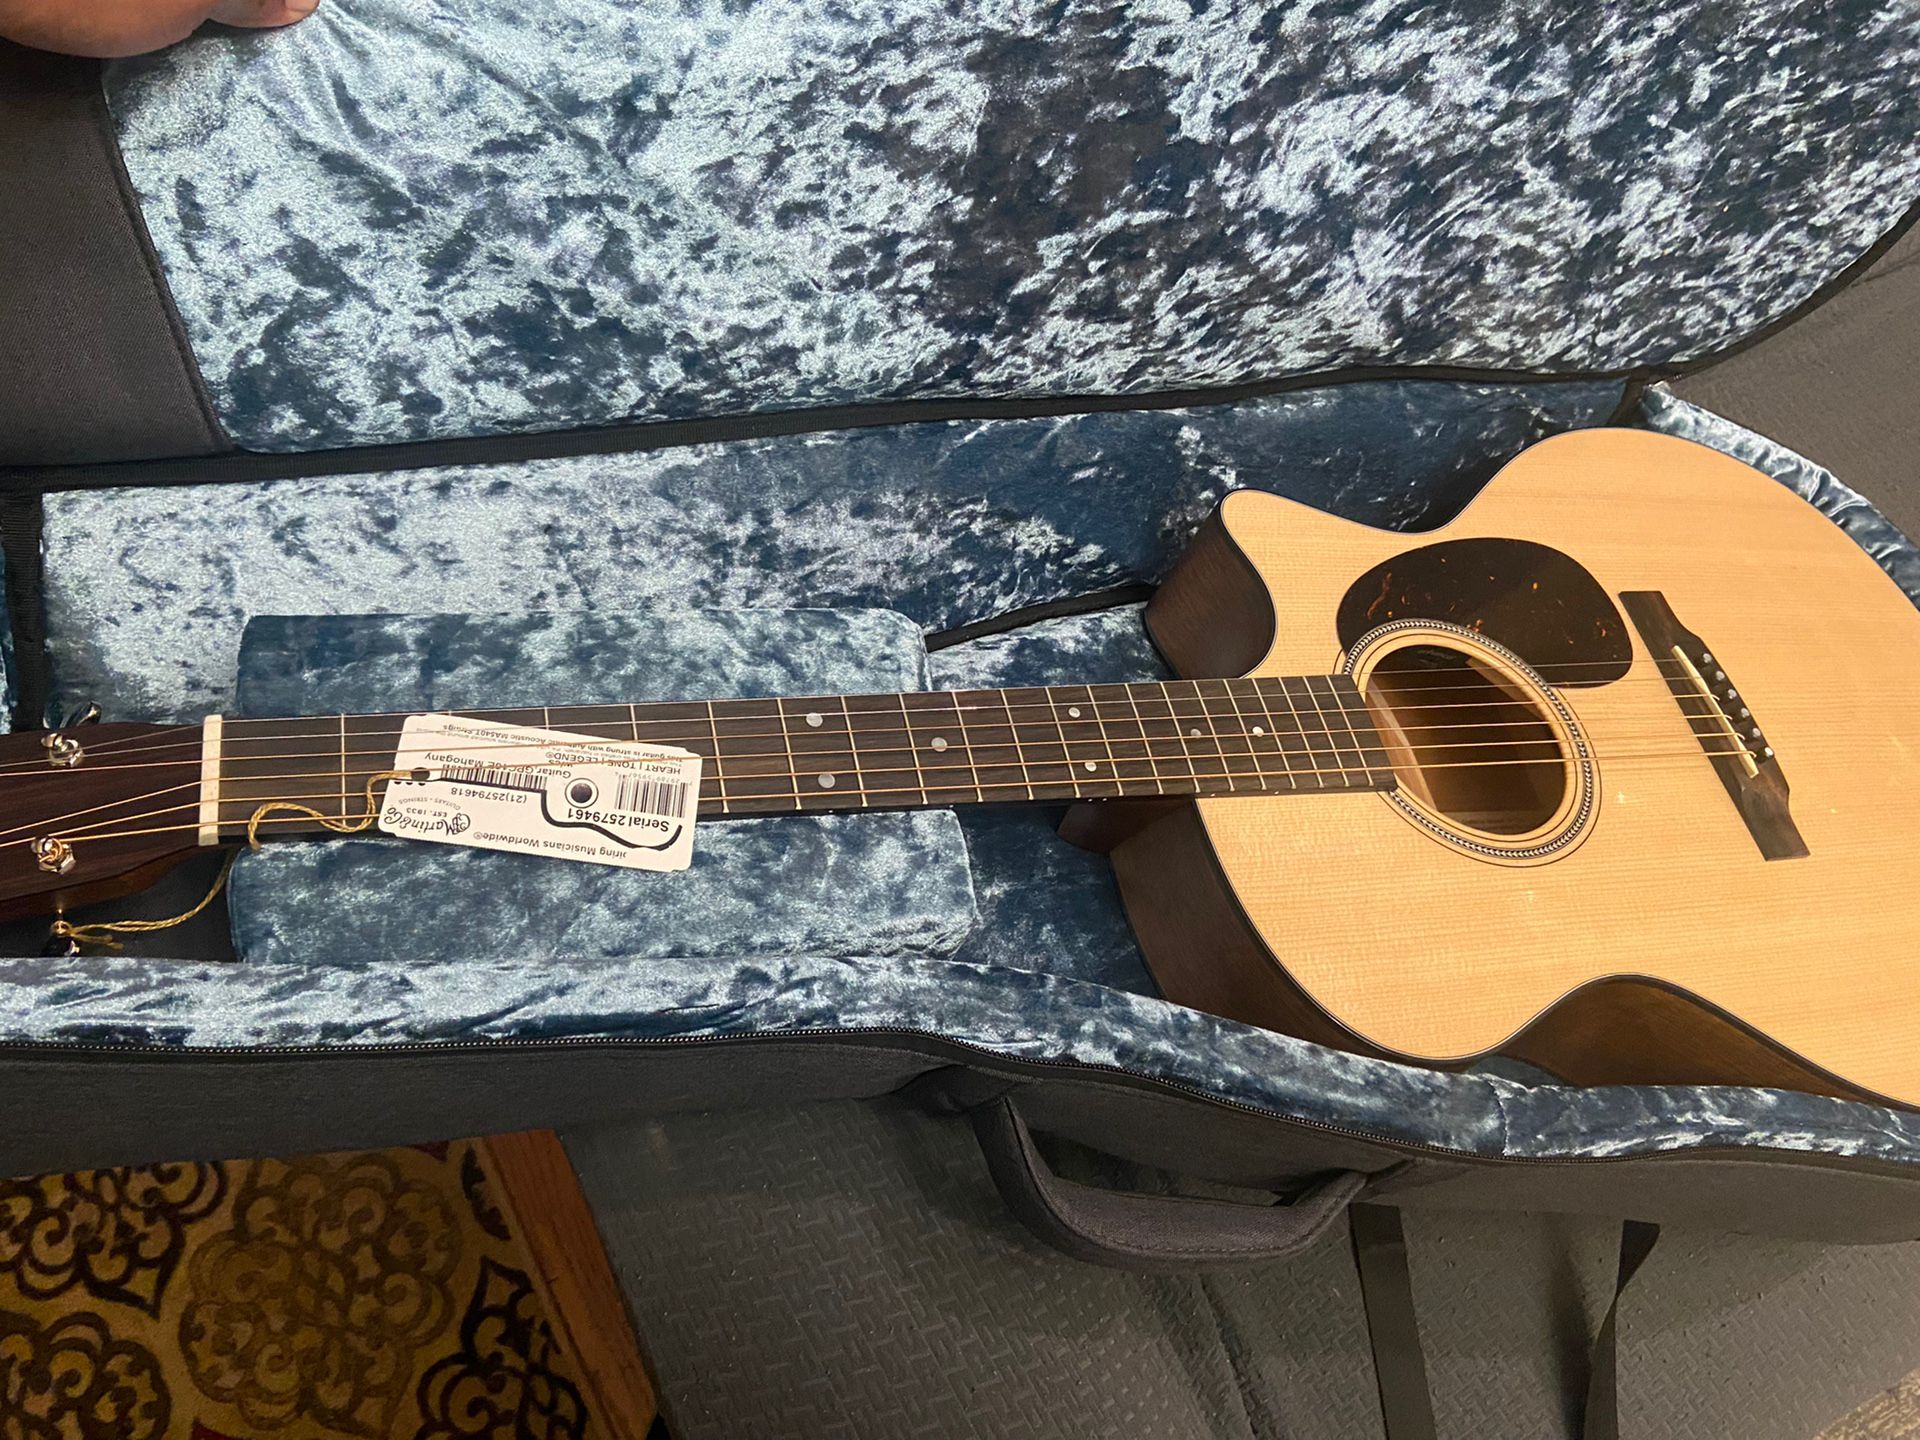 Martin GPC-16E Sitka Top Acoustic-Electric Guitar (with Gig Bag) (New) - $1,100 (Midtown)